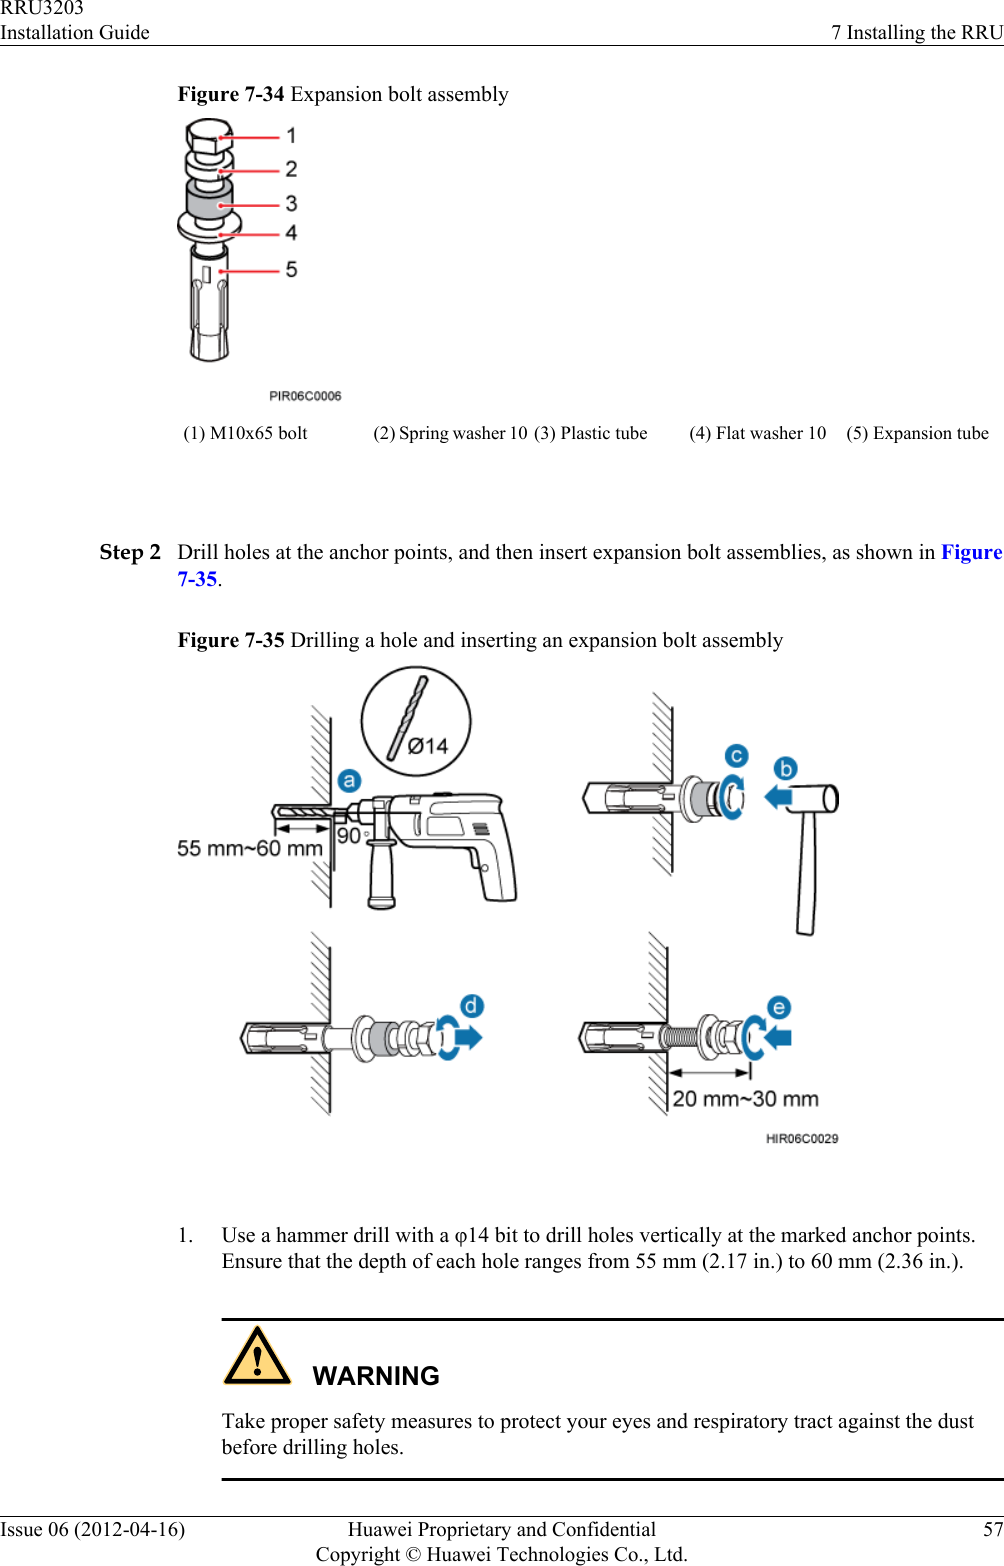 Figure 7-34 Expansion bolt assembly(1) M10x65 bolt (2) Spring washer 10 (3) Plastic tube (4) Flat washer 10 (5) Expansion tube Step 2 Drill holes at the anchor points, and then insert expansion bolt assemblies, as shown in Figure7-35.Figure 7-35 Drilling a hole and inserting an expansion bolt assembly 1. Use a hammer drill with a φ14 bit to drill holes vertically at the marked anchor points.Ensure that the depth of each hole ranges from 55 mm (2.17 in.) to 60 mm (2.36 in.).WARNINGTake proper safety measures to protect your eyes and respiratory tract against the dustbefore drilling holes.RRU3203Installation Guide 7 Installing the RRUIssue 06 (2012-04-16) Huawei Proprietary and ConfidentialCopyright © Huawei Technologies Co., Ltd.57